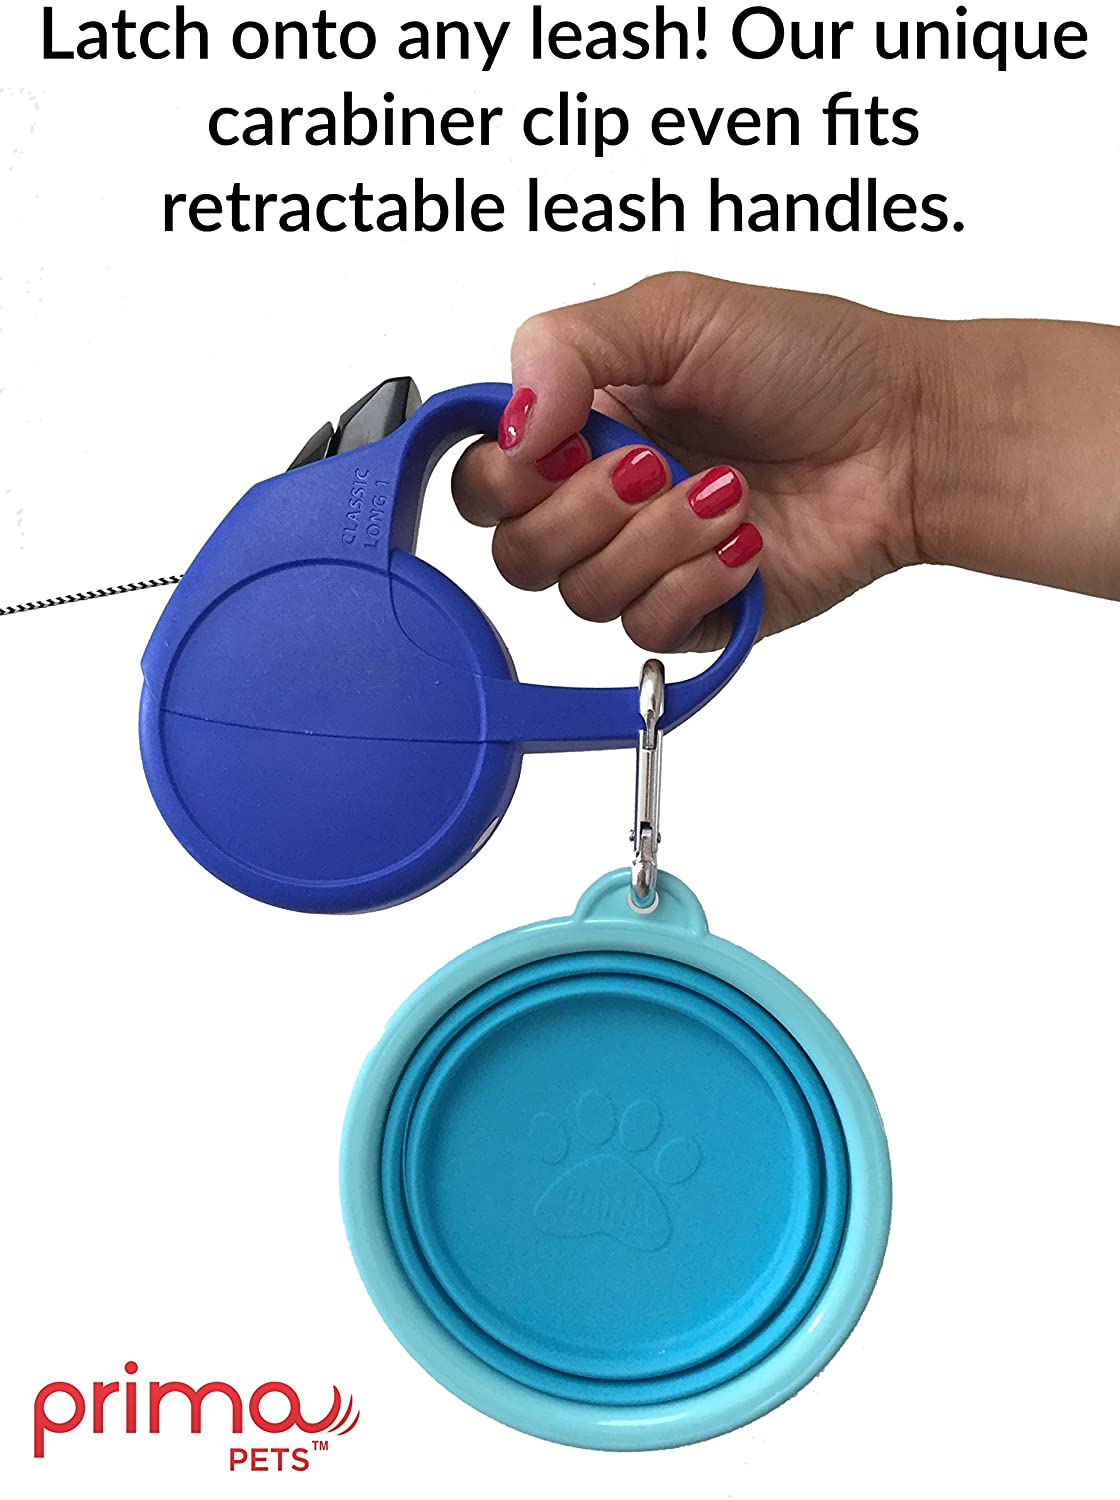 Prima Pet Expandable/ Collapsible Silicone Food & Water Travel Bowl with Clip for Small & Medium Dog and Cat, Size: 1.5 Cups (5.1 Inch Diameter Bowl) (AQUA) - (For 12 piece(s))